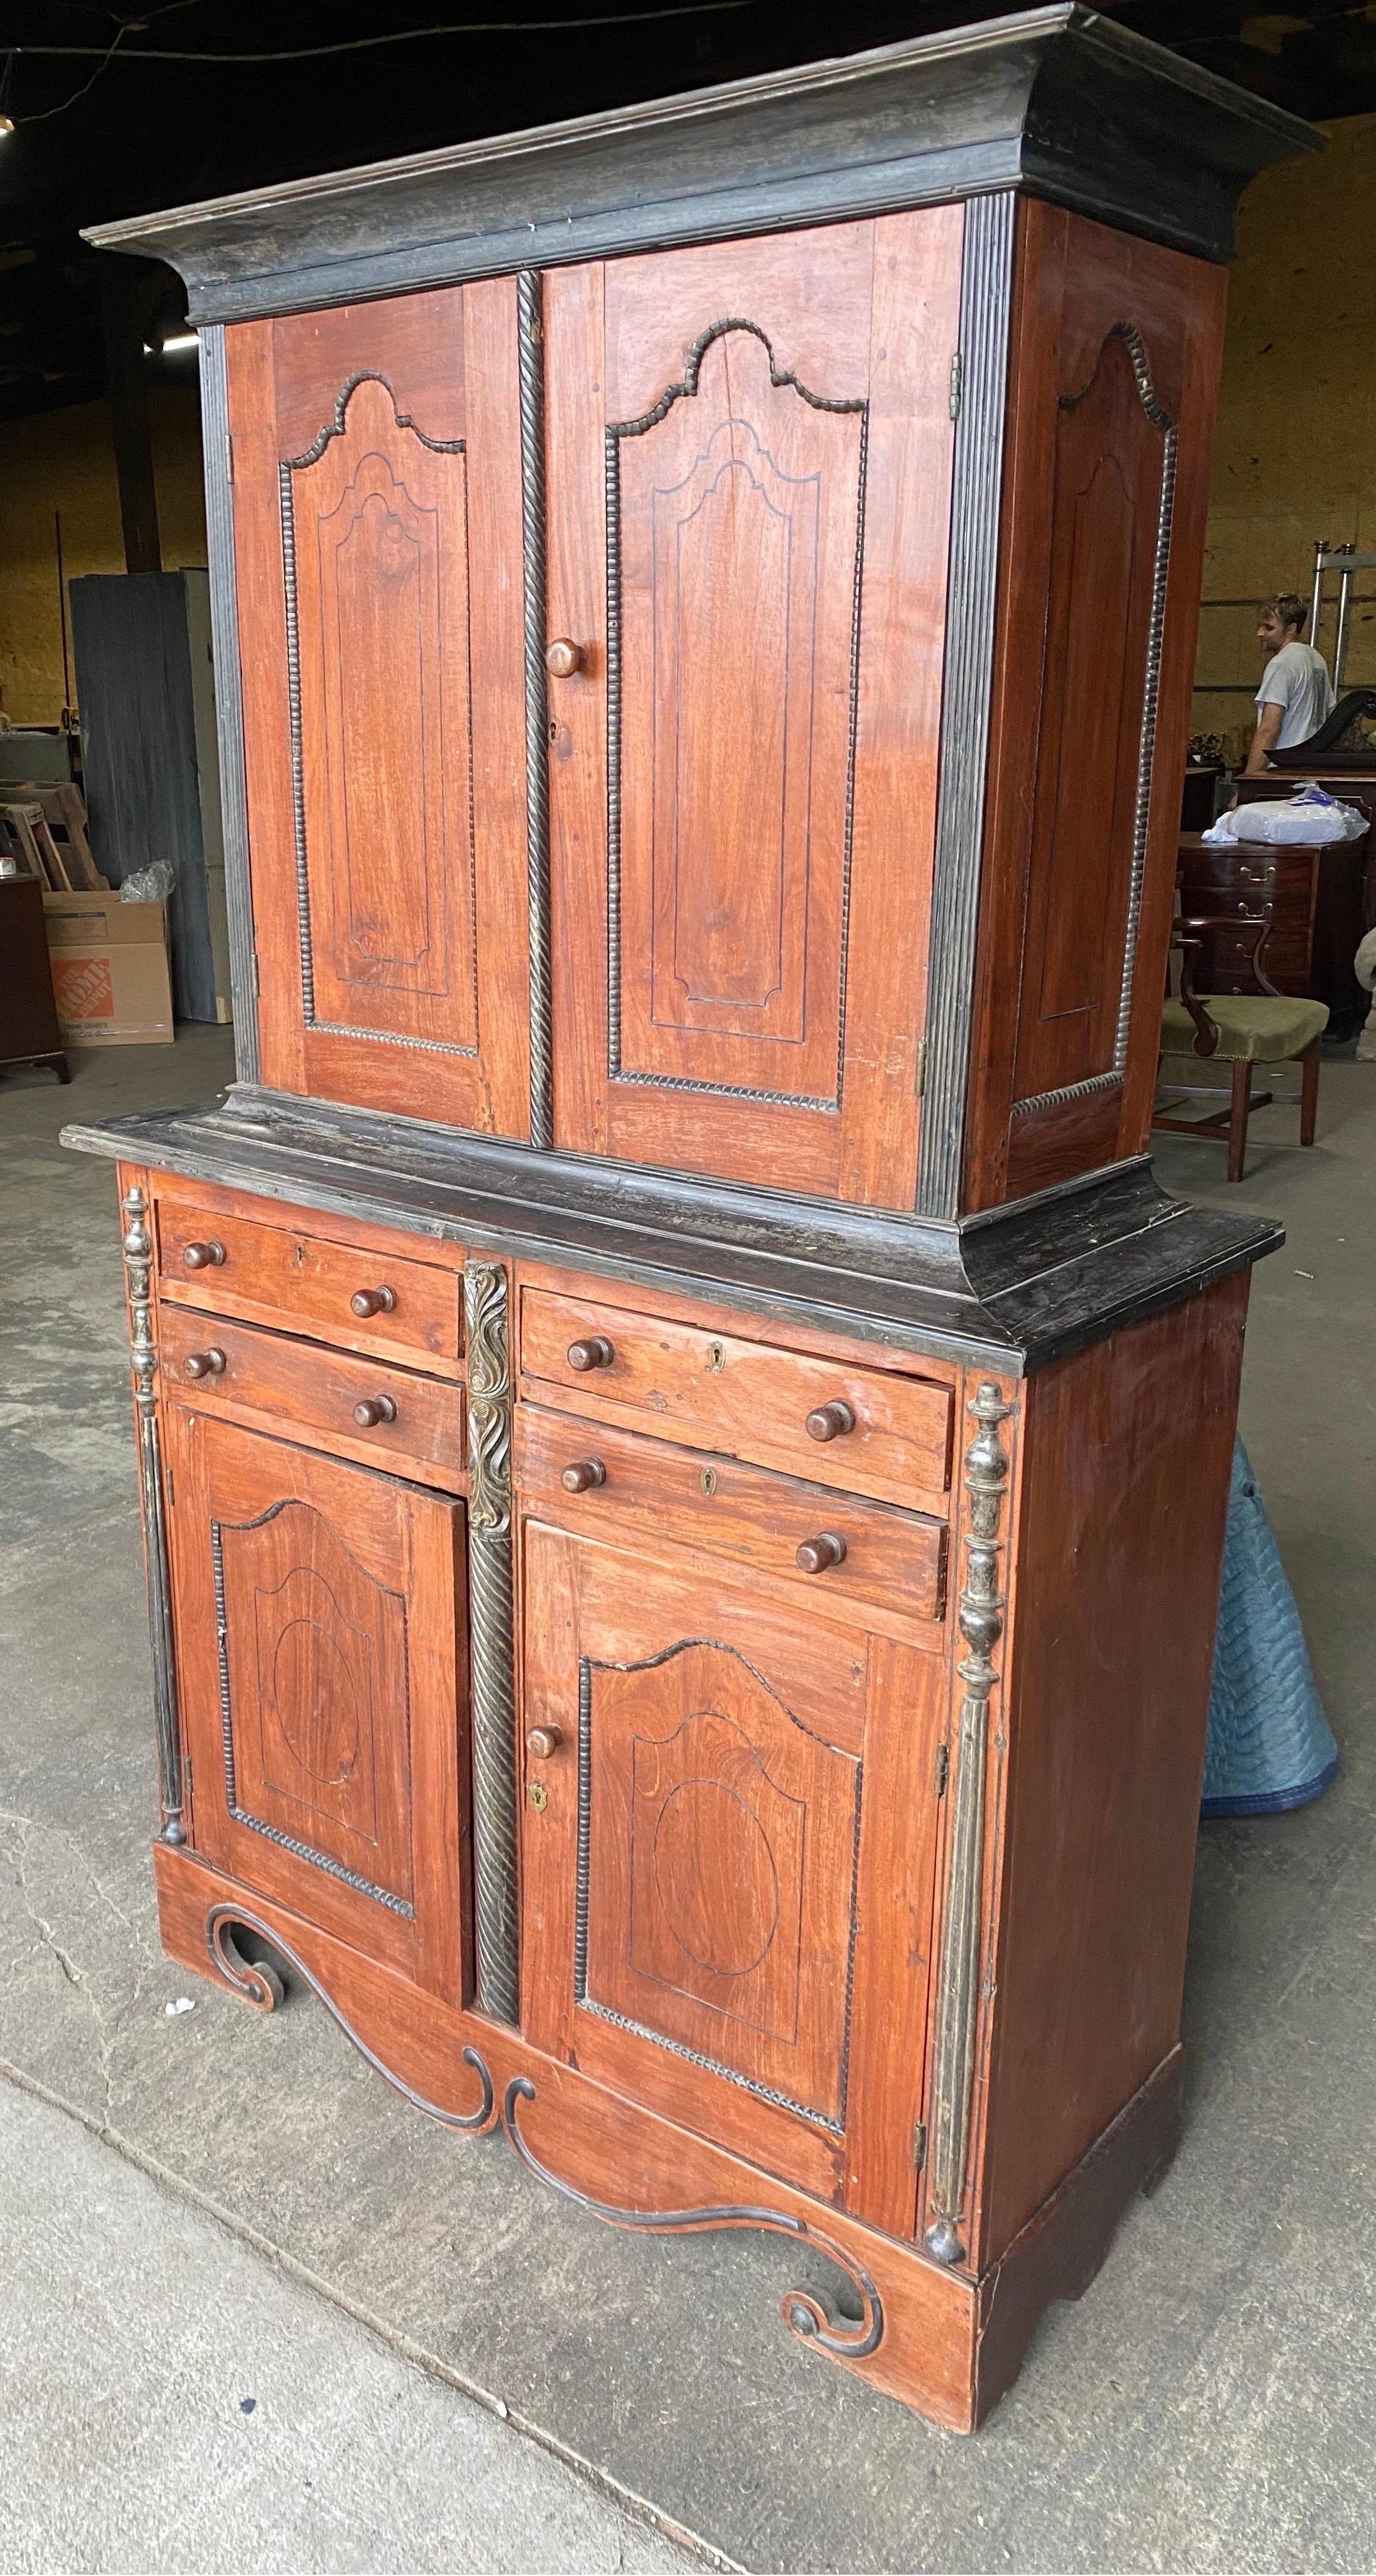 19th century Ceylonese / East Indies jackwood and ebony 4 door press or cabinet with 4 central drawers between the top and bottom. Hand carved and applied ebony pilasters to case and moldings to overly exaggerated feet. Beautiful form from the Dutch